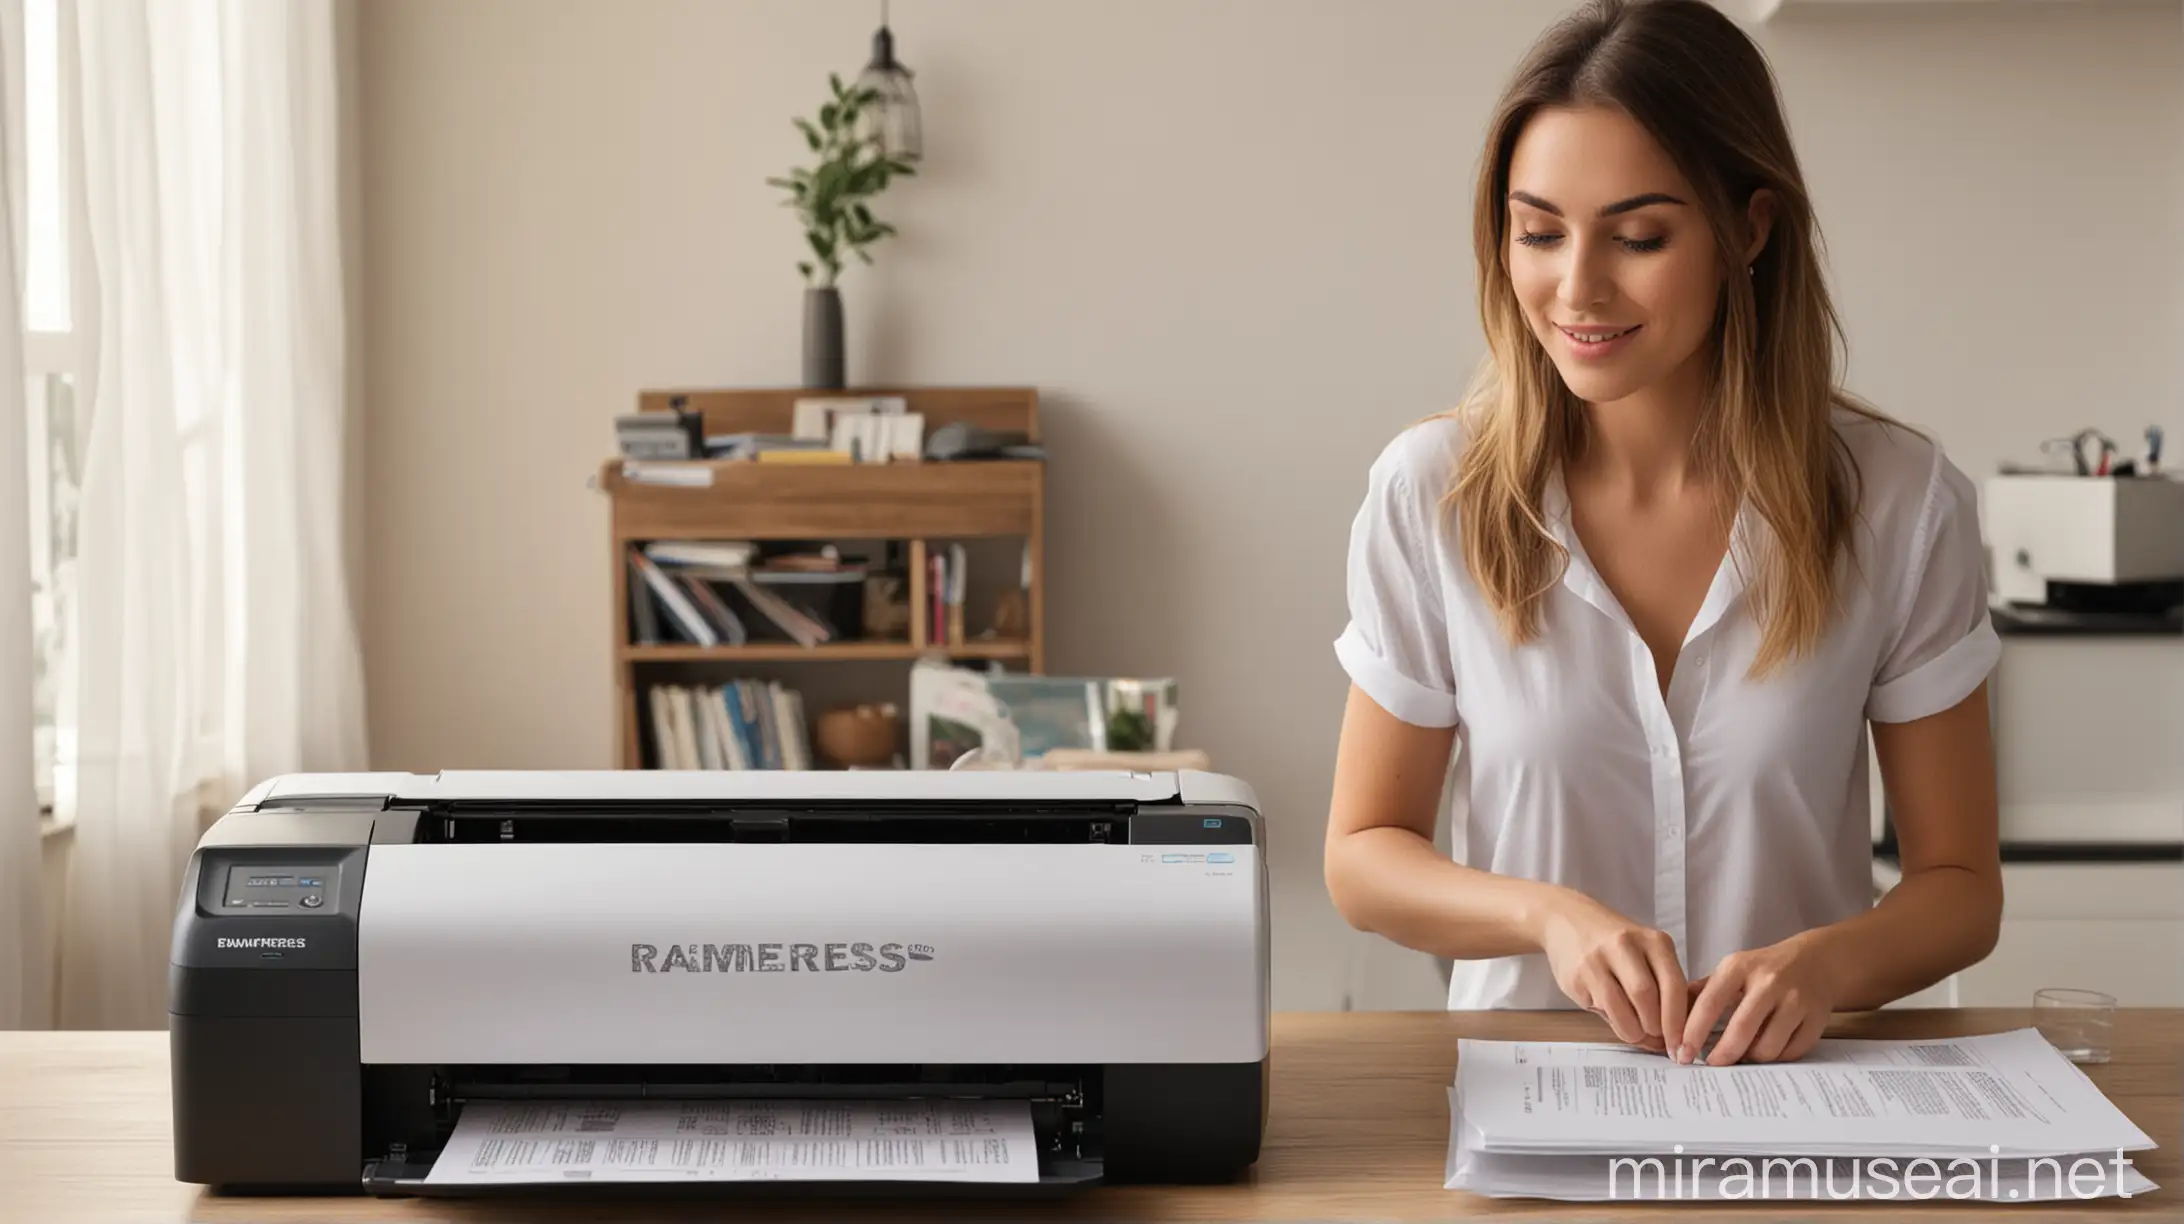 a picture of a beautiful woman using a wireless printer, and the word "Ramexpress" on the paper she is printed, 